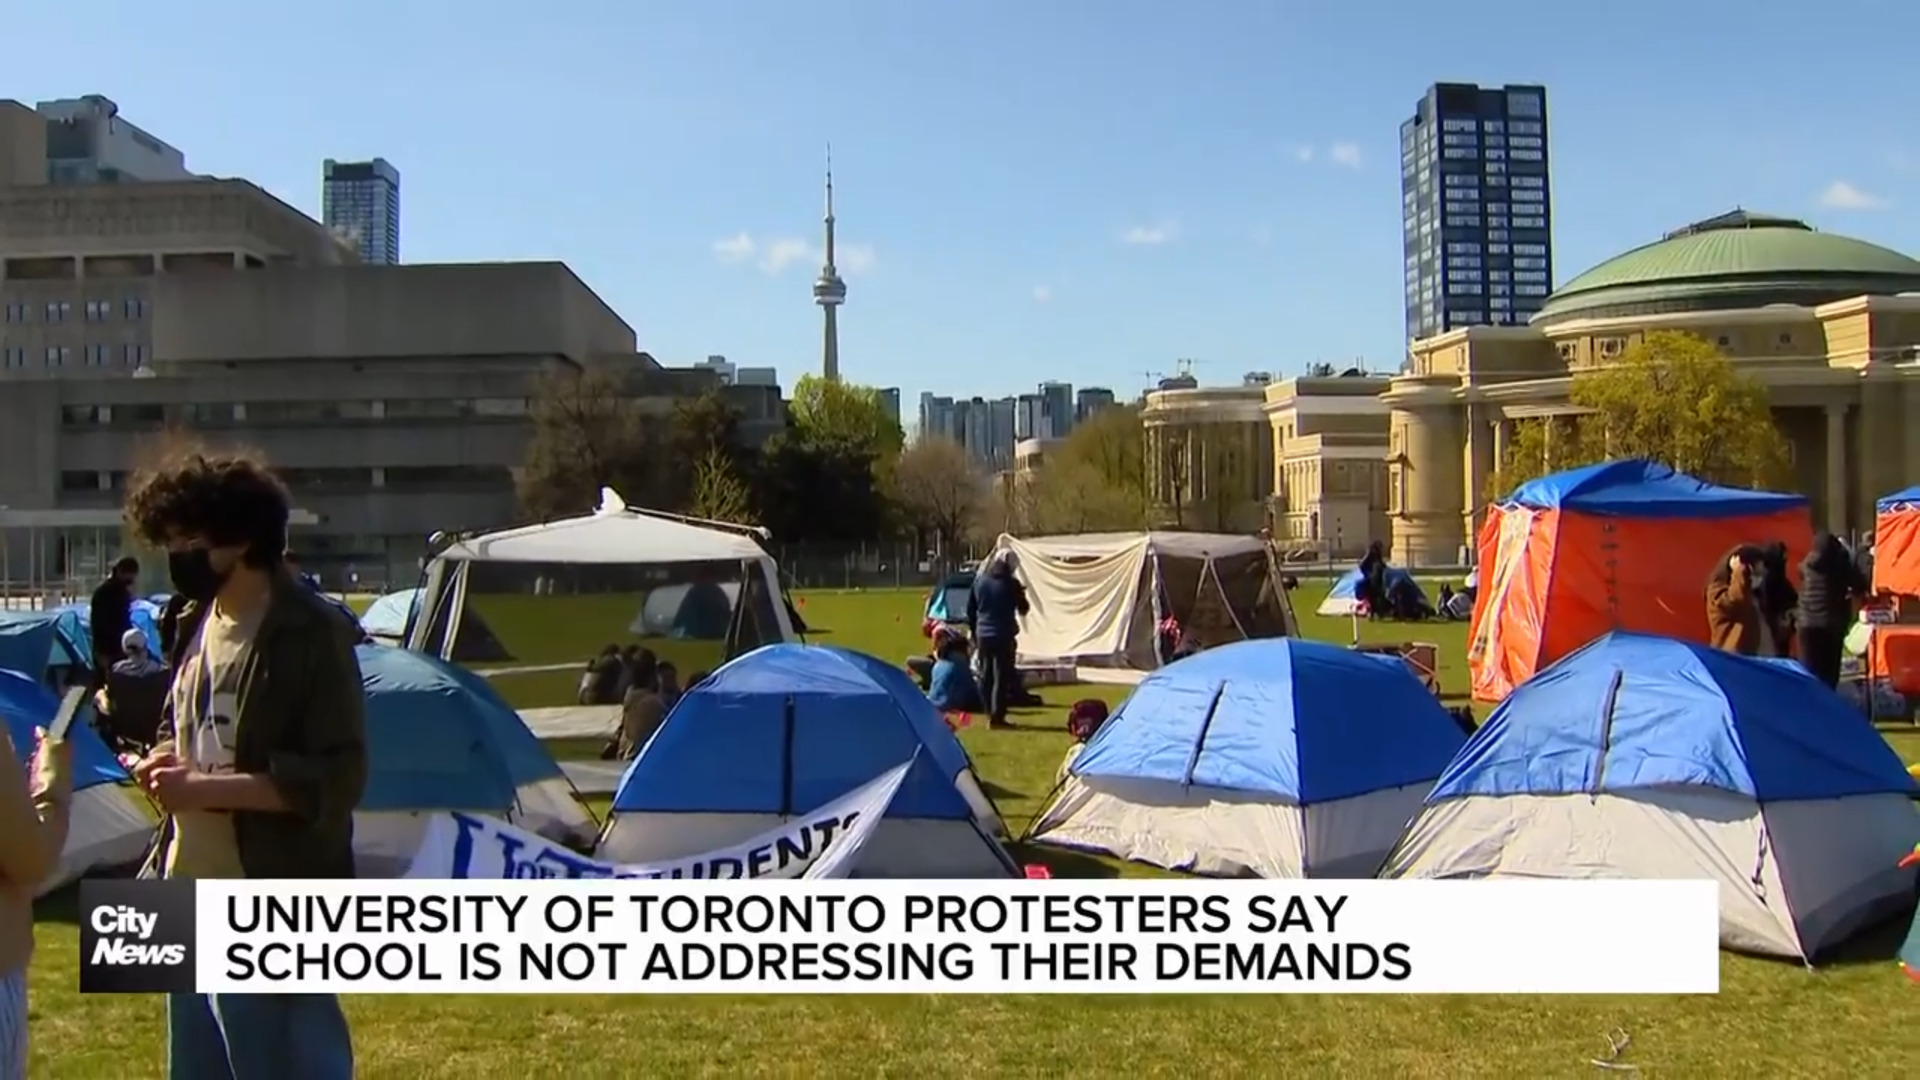 Pro-Palestinian protesters say no progress being made with U of T